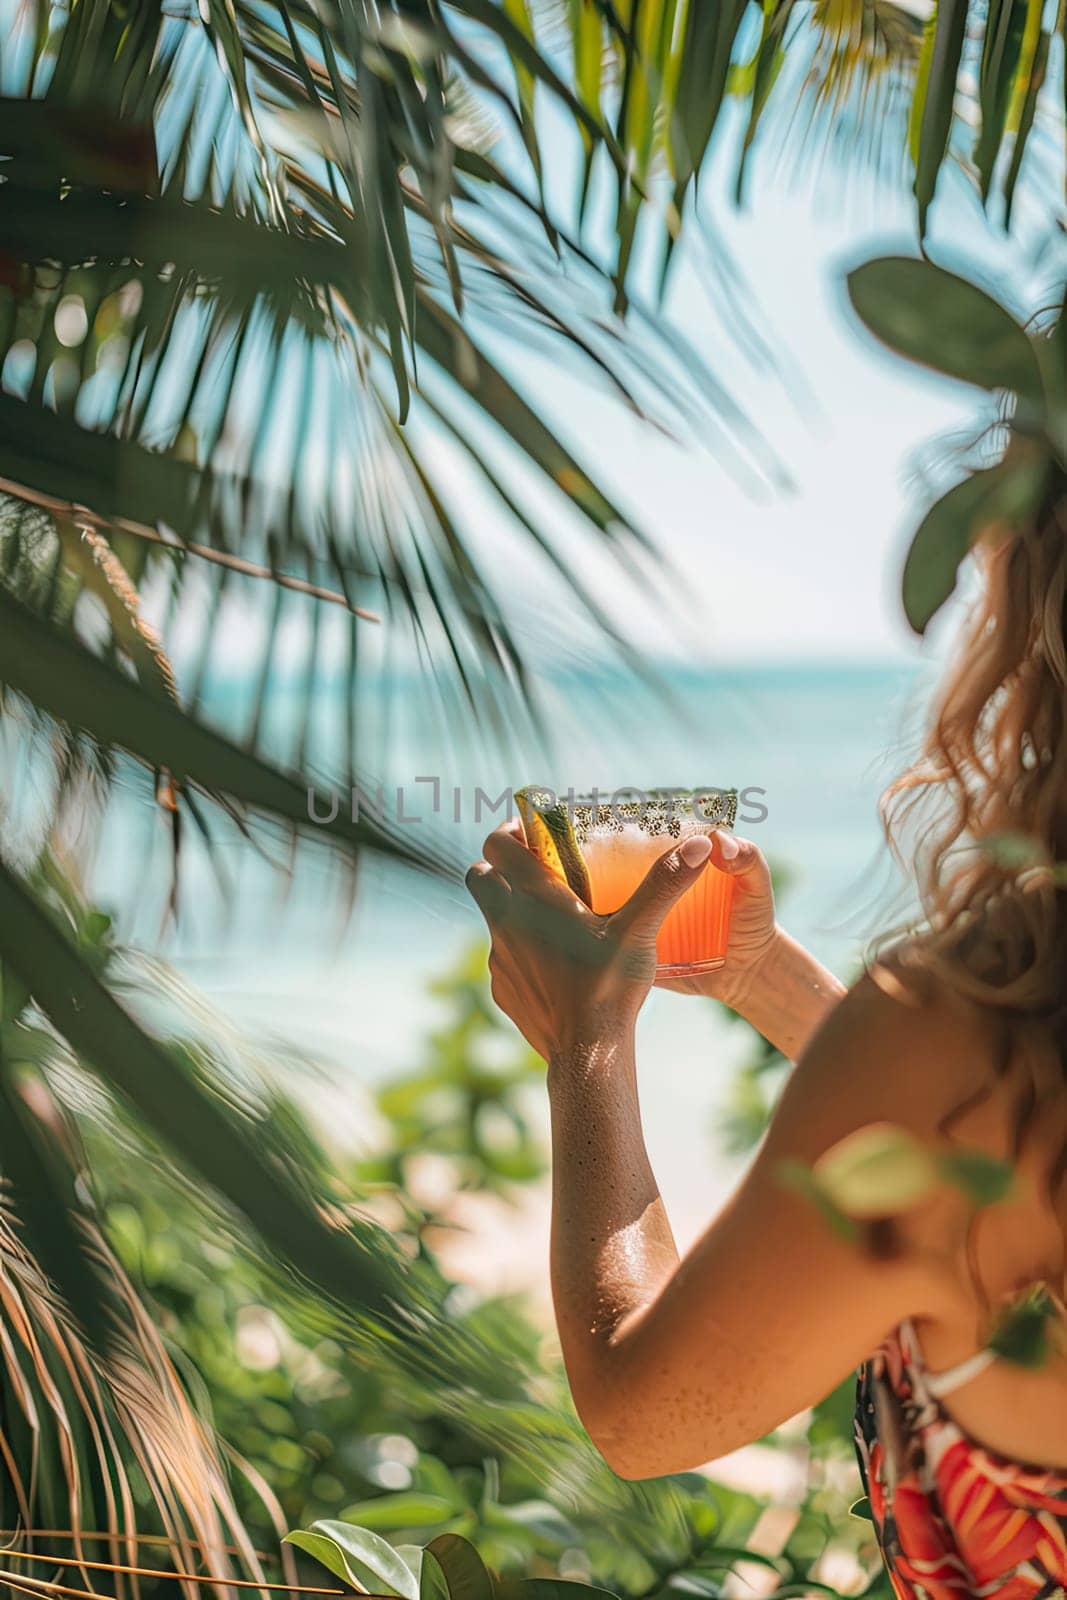 A cocktail in the hands of a girl on the beach. Selective focus. by yanadjana